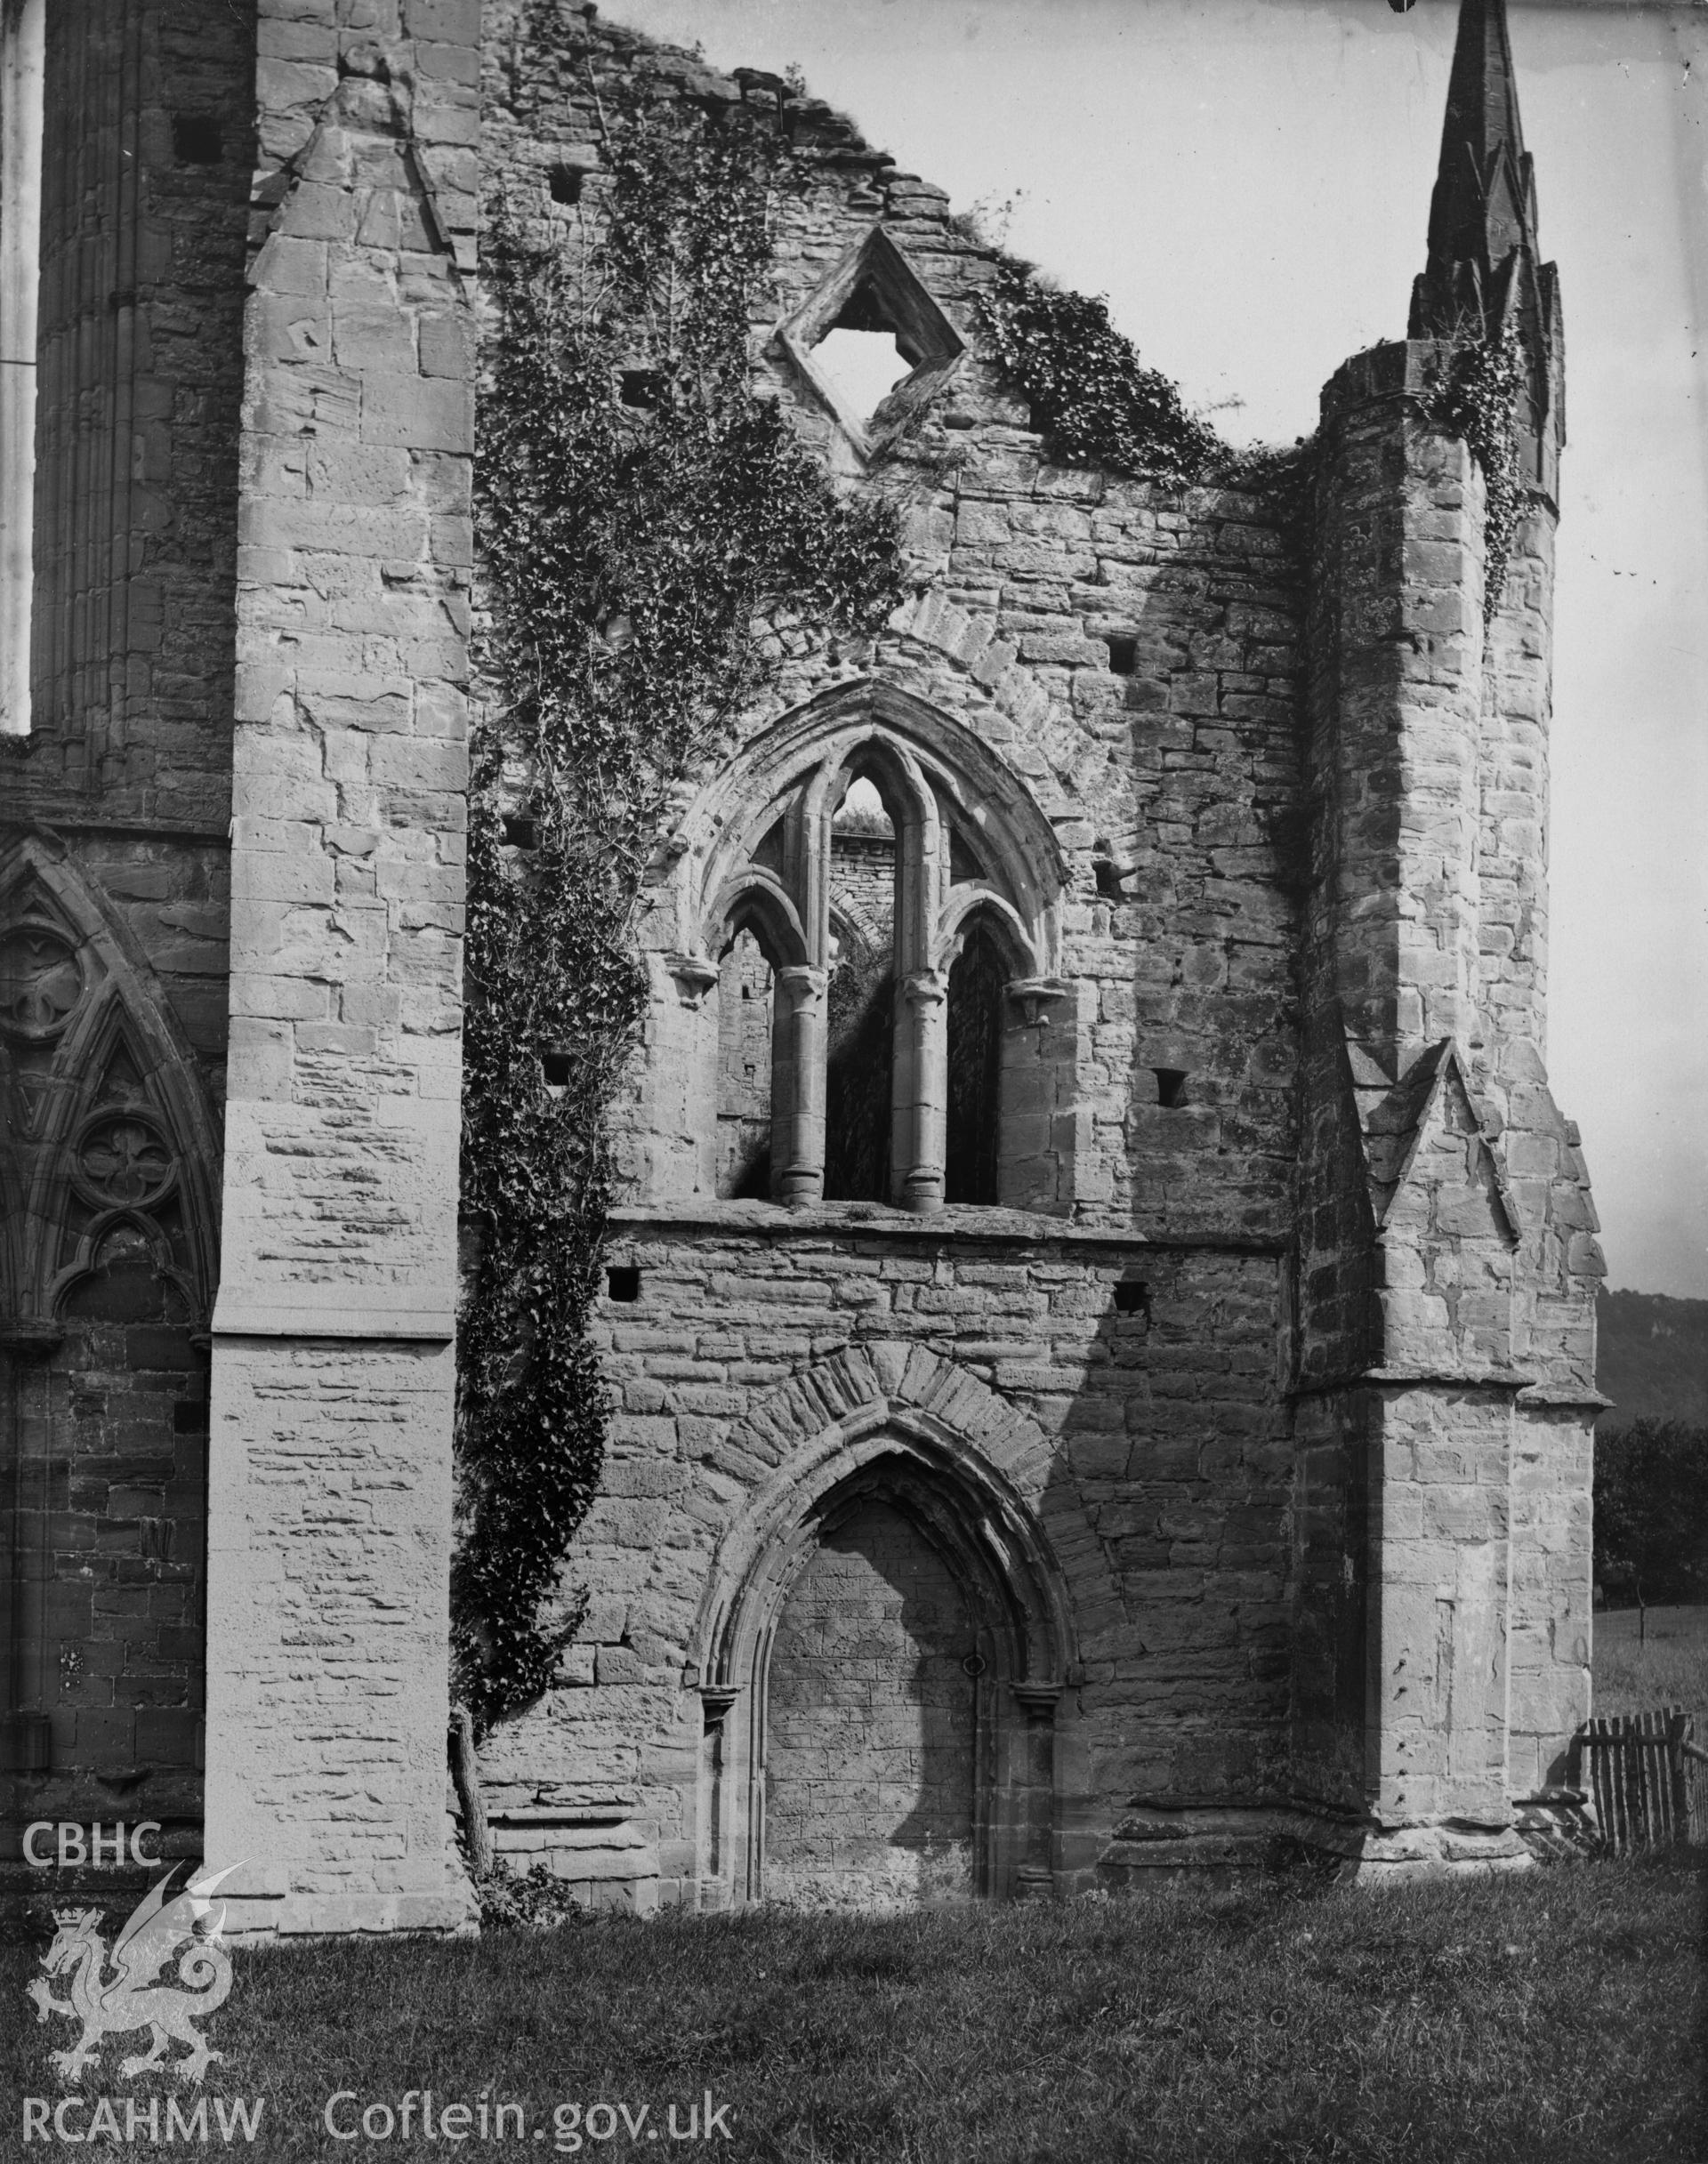 Digital copy of an early National Buildings Record photograph of Tintern Abbey showing the west end southside.